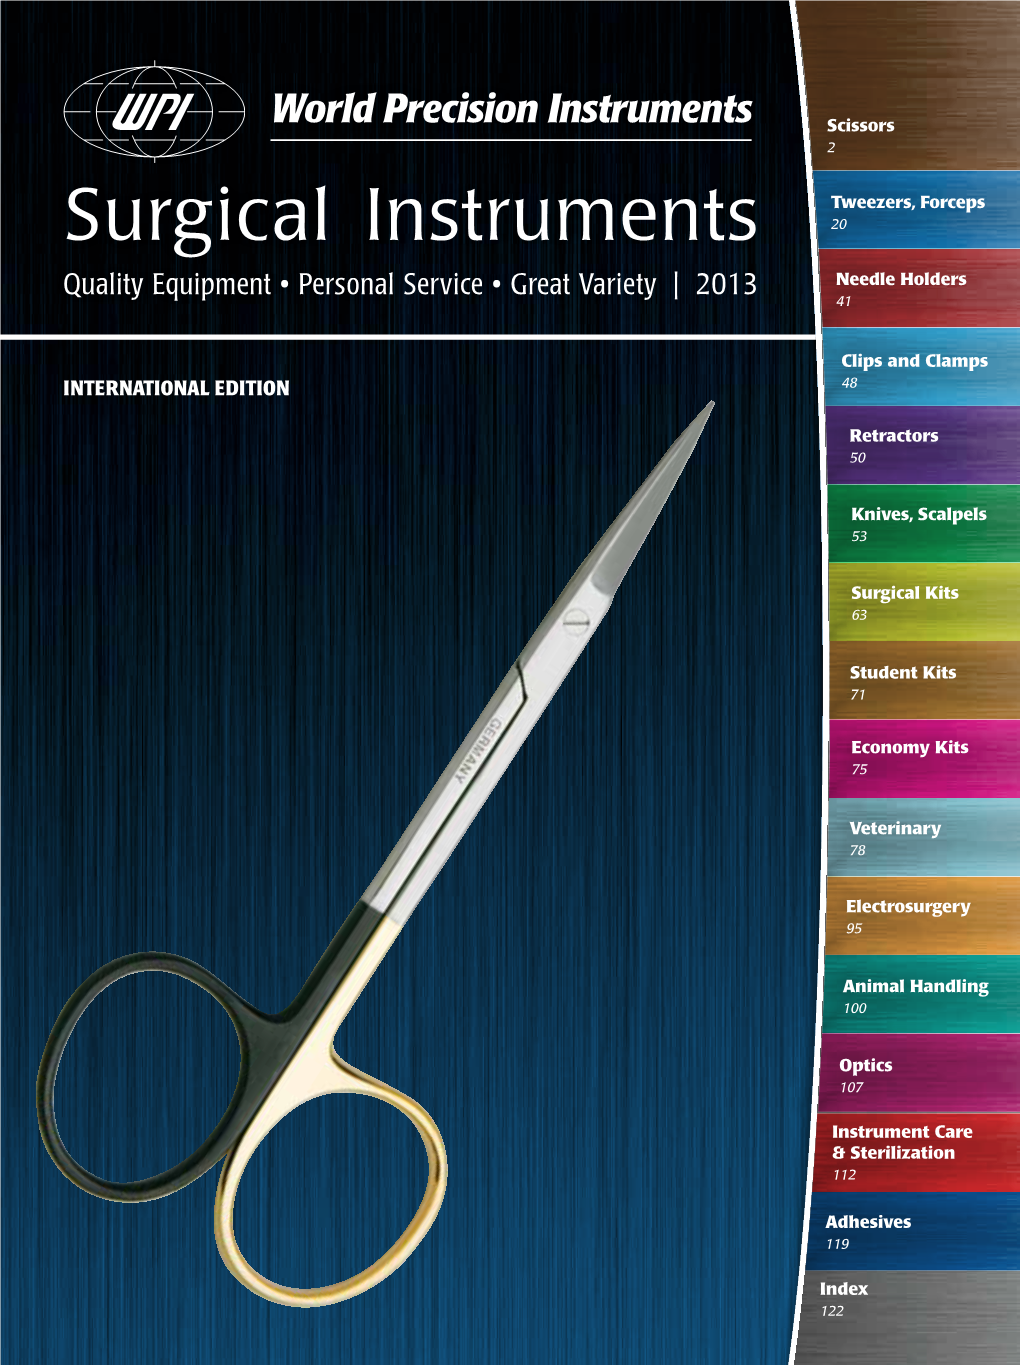 Surgical Instruments 20 Quality Equipment • Personal Service • Great Variety | 2013 Needle Holders 41